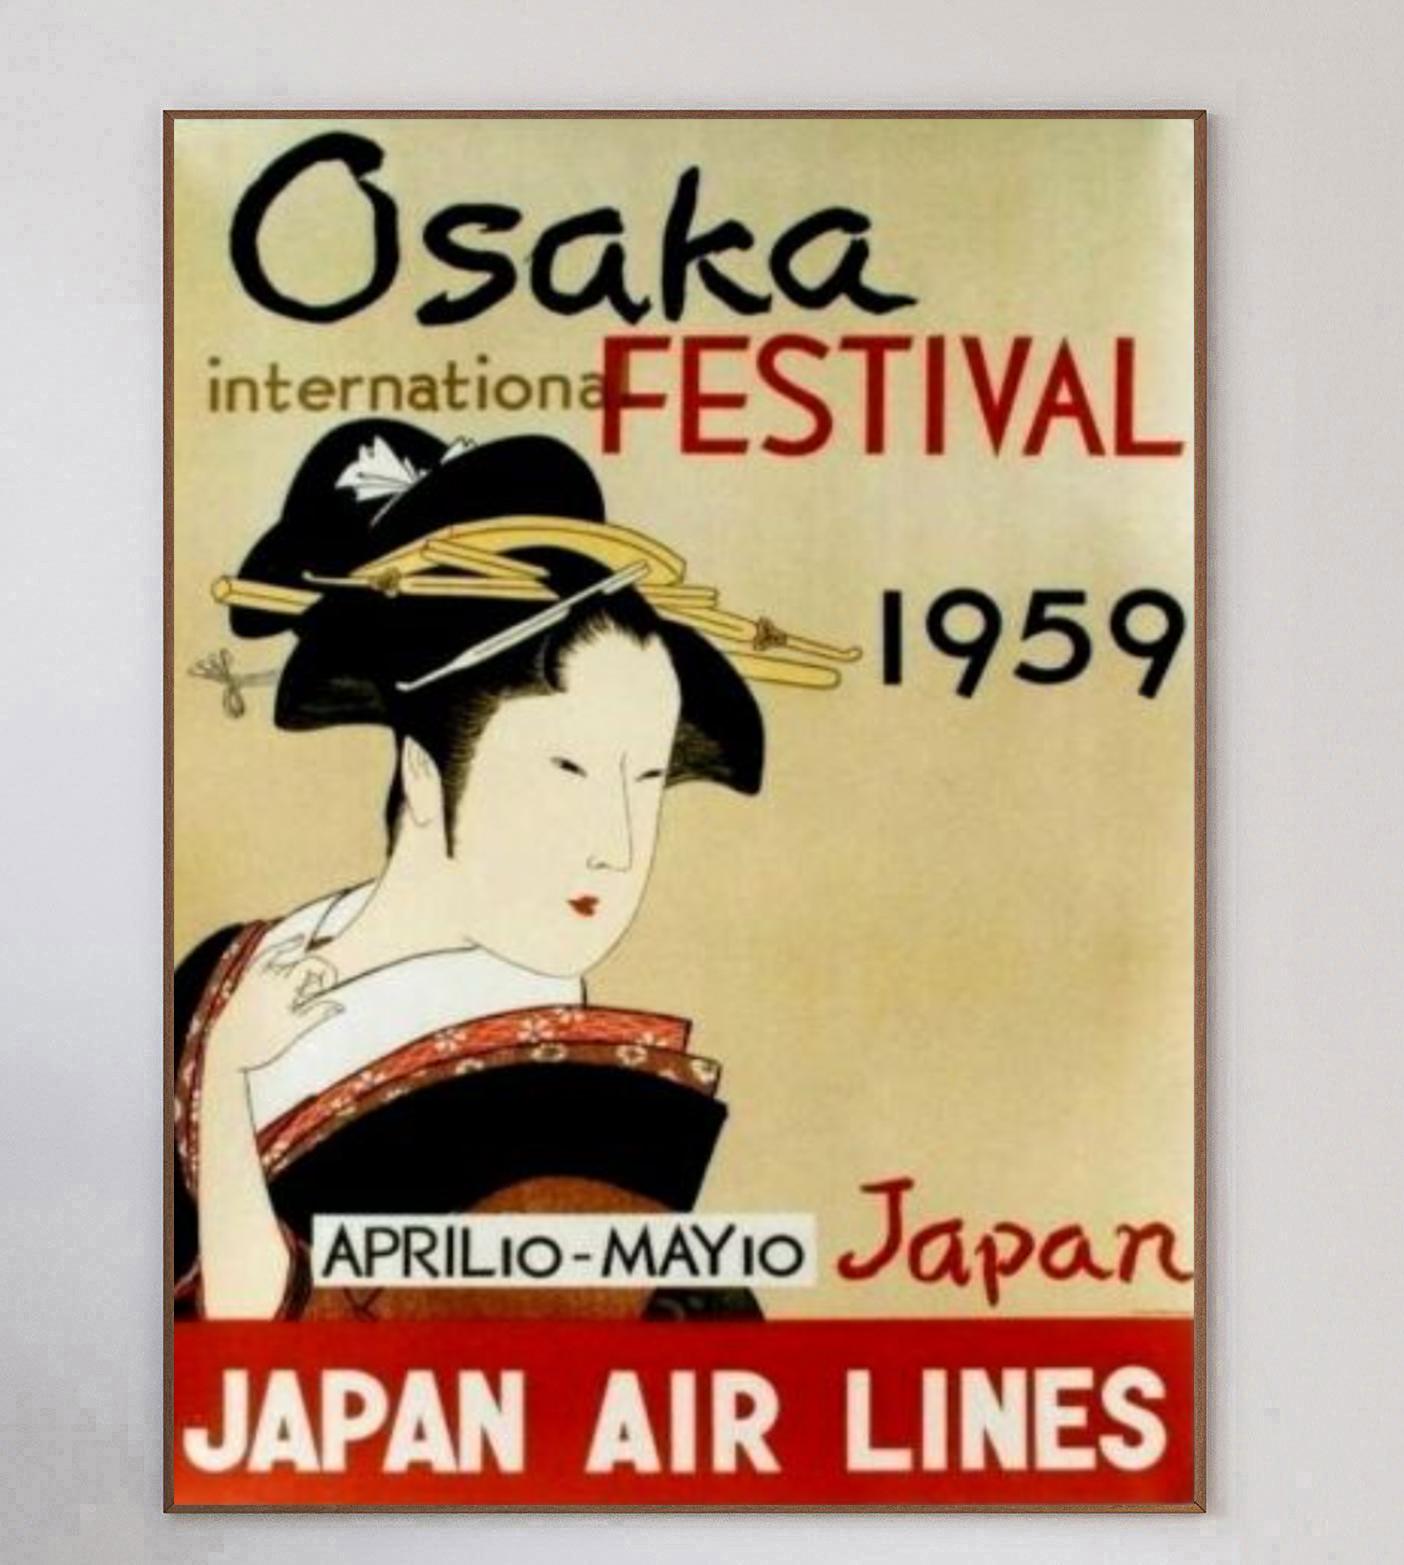 Depicting a geisha in traditional style, this brilliant & rare poster was produced in 1959 to promote Japan Air Lines routes to the Osaka International Festival which was held between April 10th to May 10th of the same year. 

Japan's largest